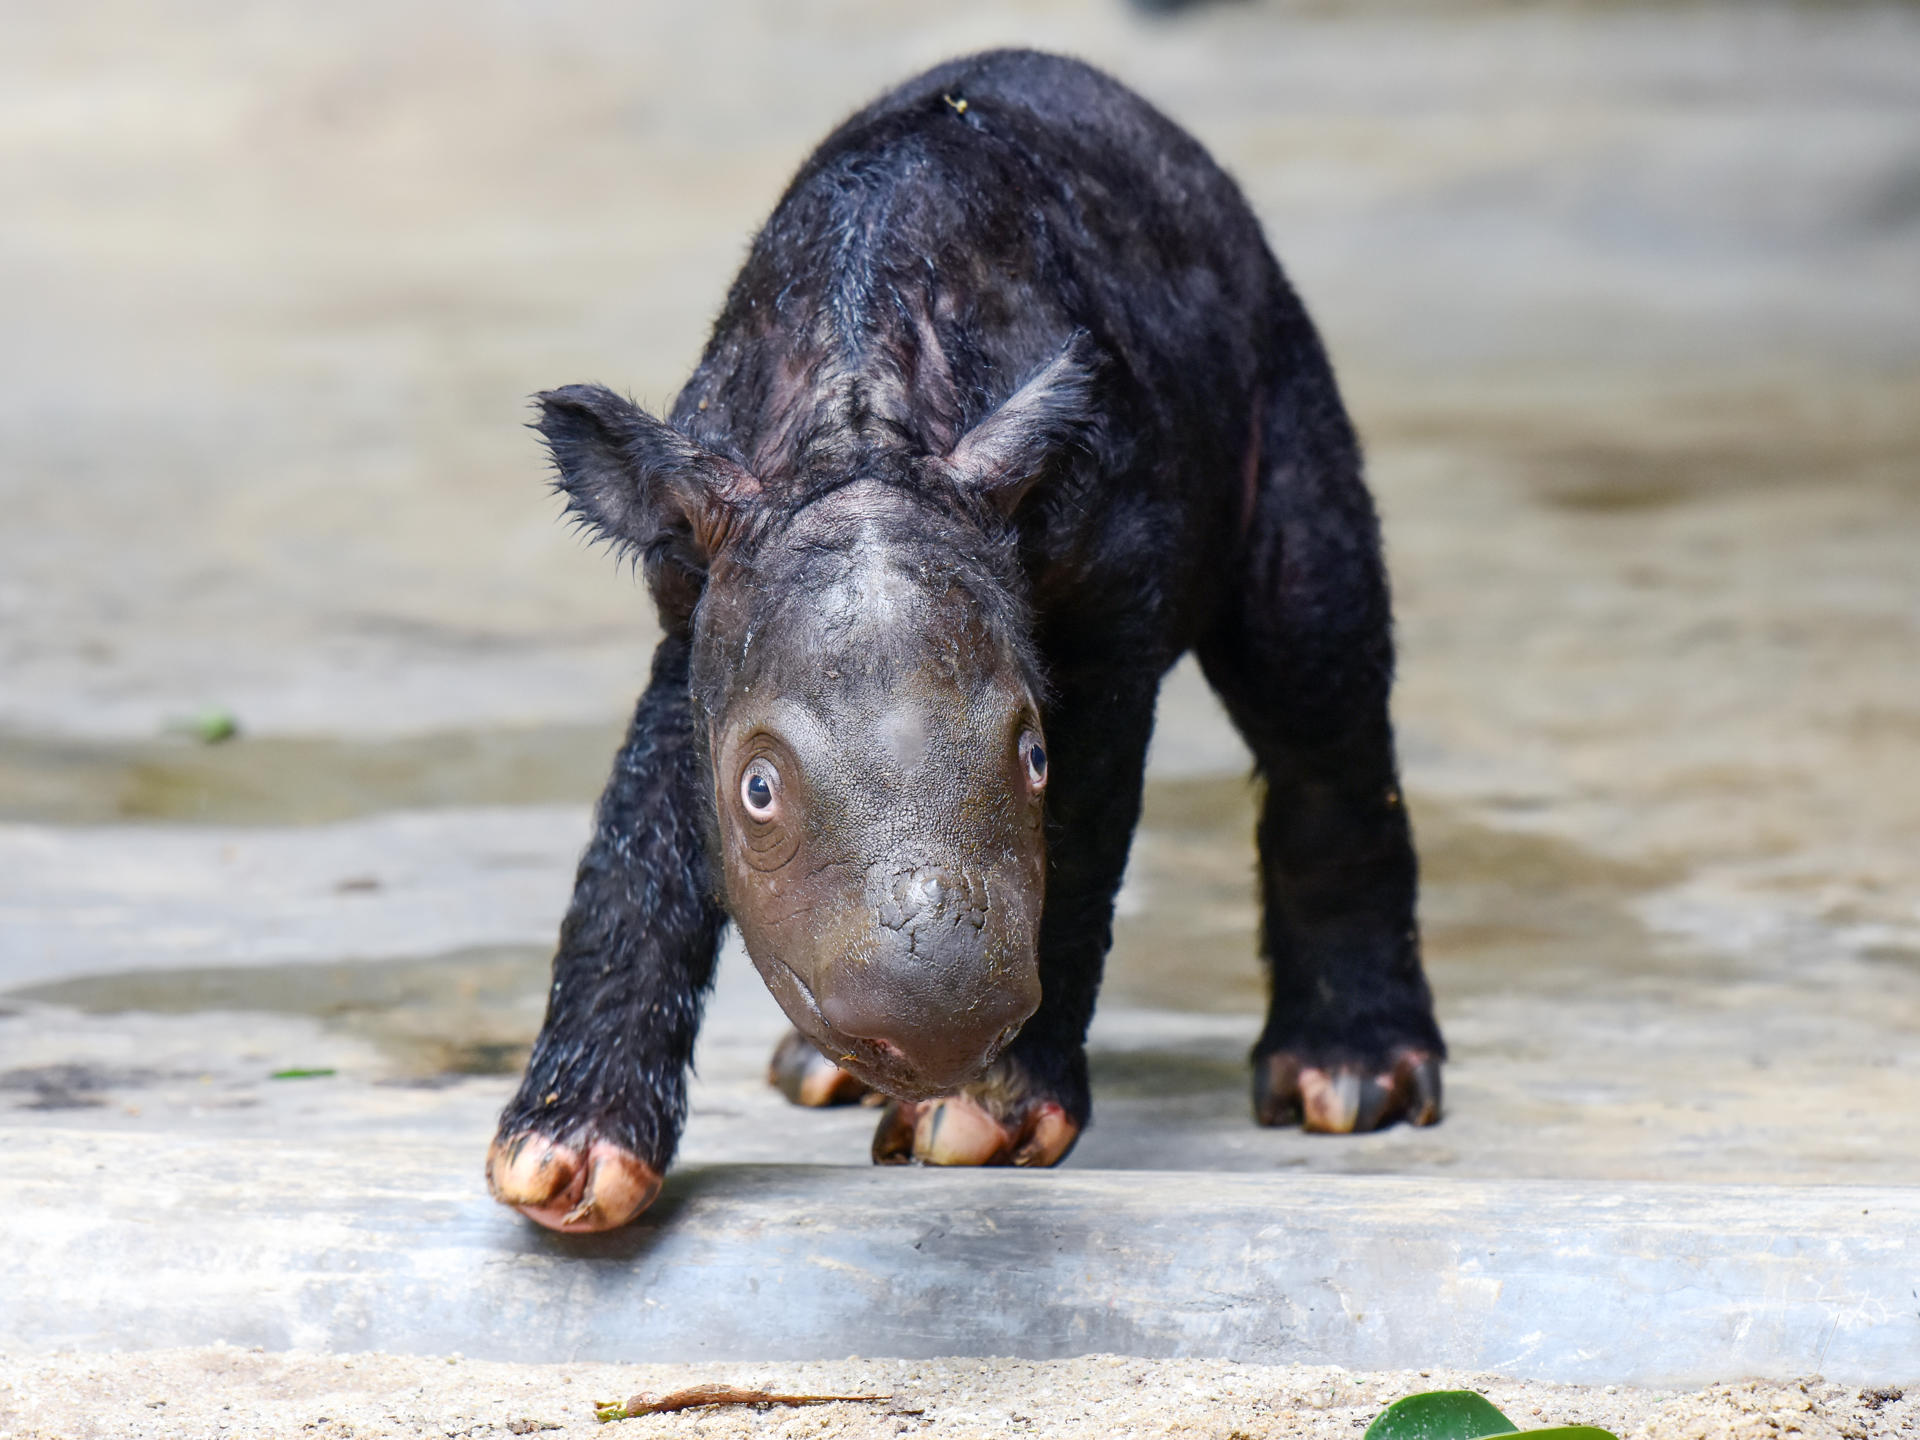 An undated handout photo from Way Kambas National Park in Indonesia shows a Sumatran rhinoceros calf recently born in the park. EFE/HANDOUT/WAY KAMBAS NATIONAL PARK